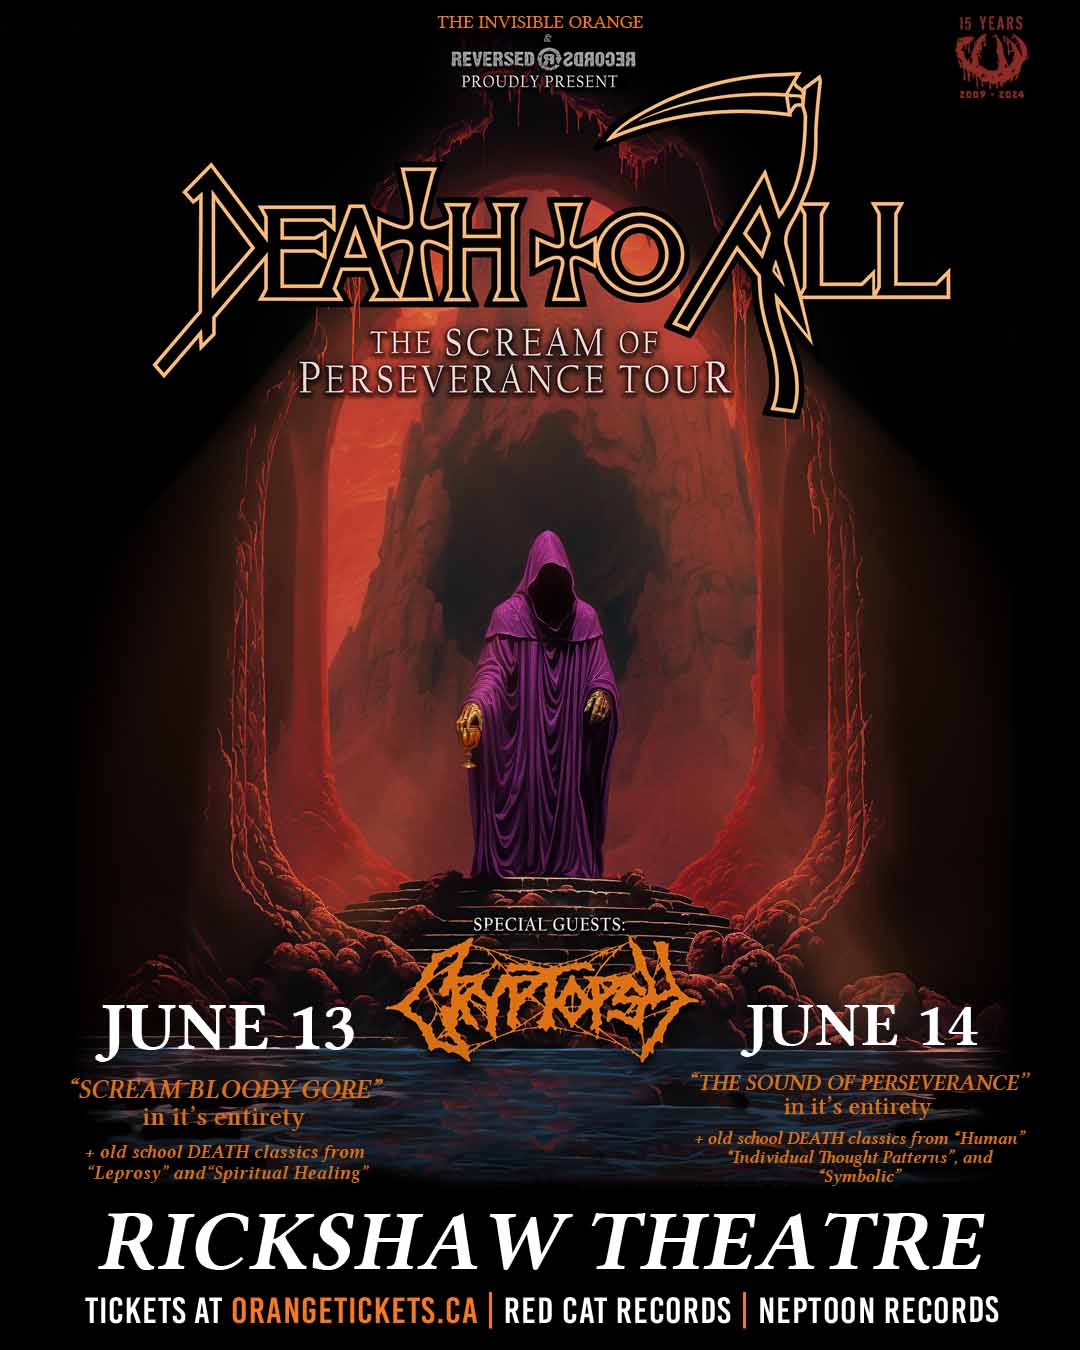 DEATH TO ALL - The Scream Of Perseverance Tour